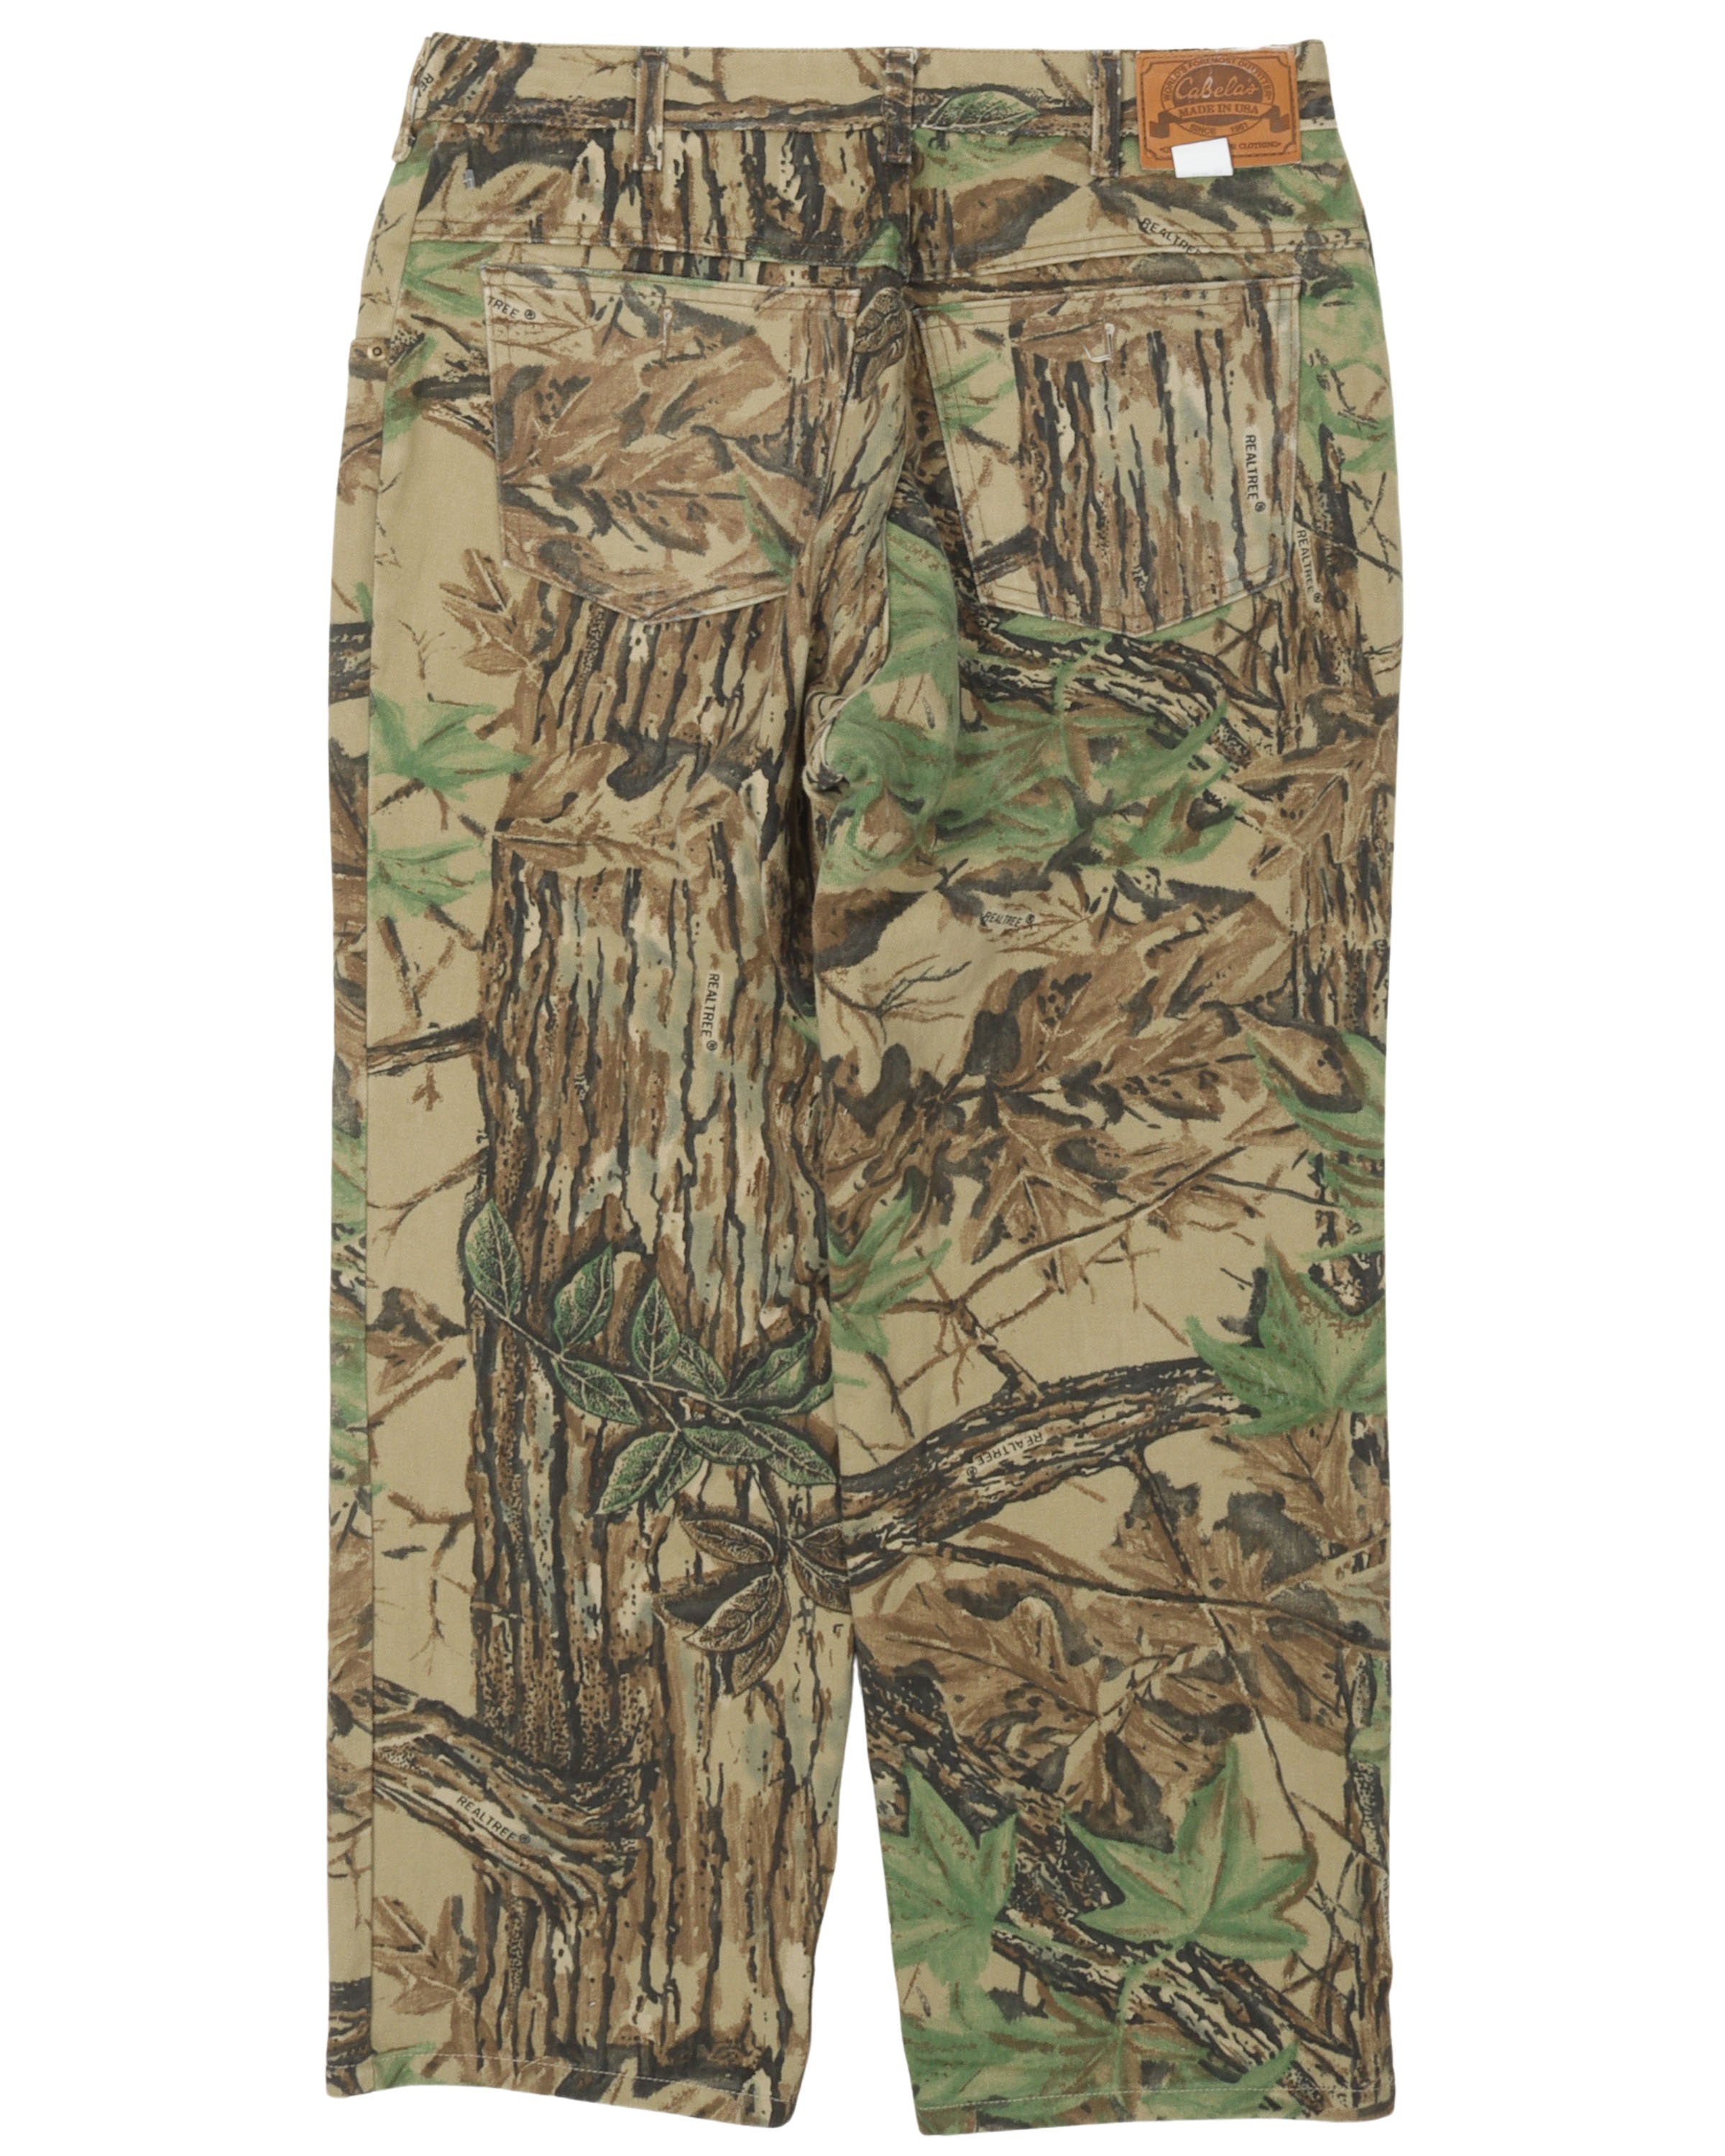 Cabela's RealTree Camouflage Pants